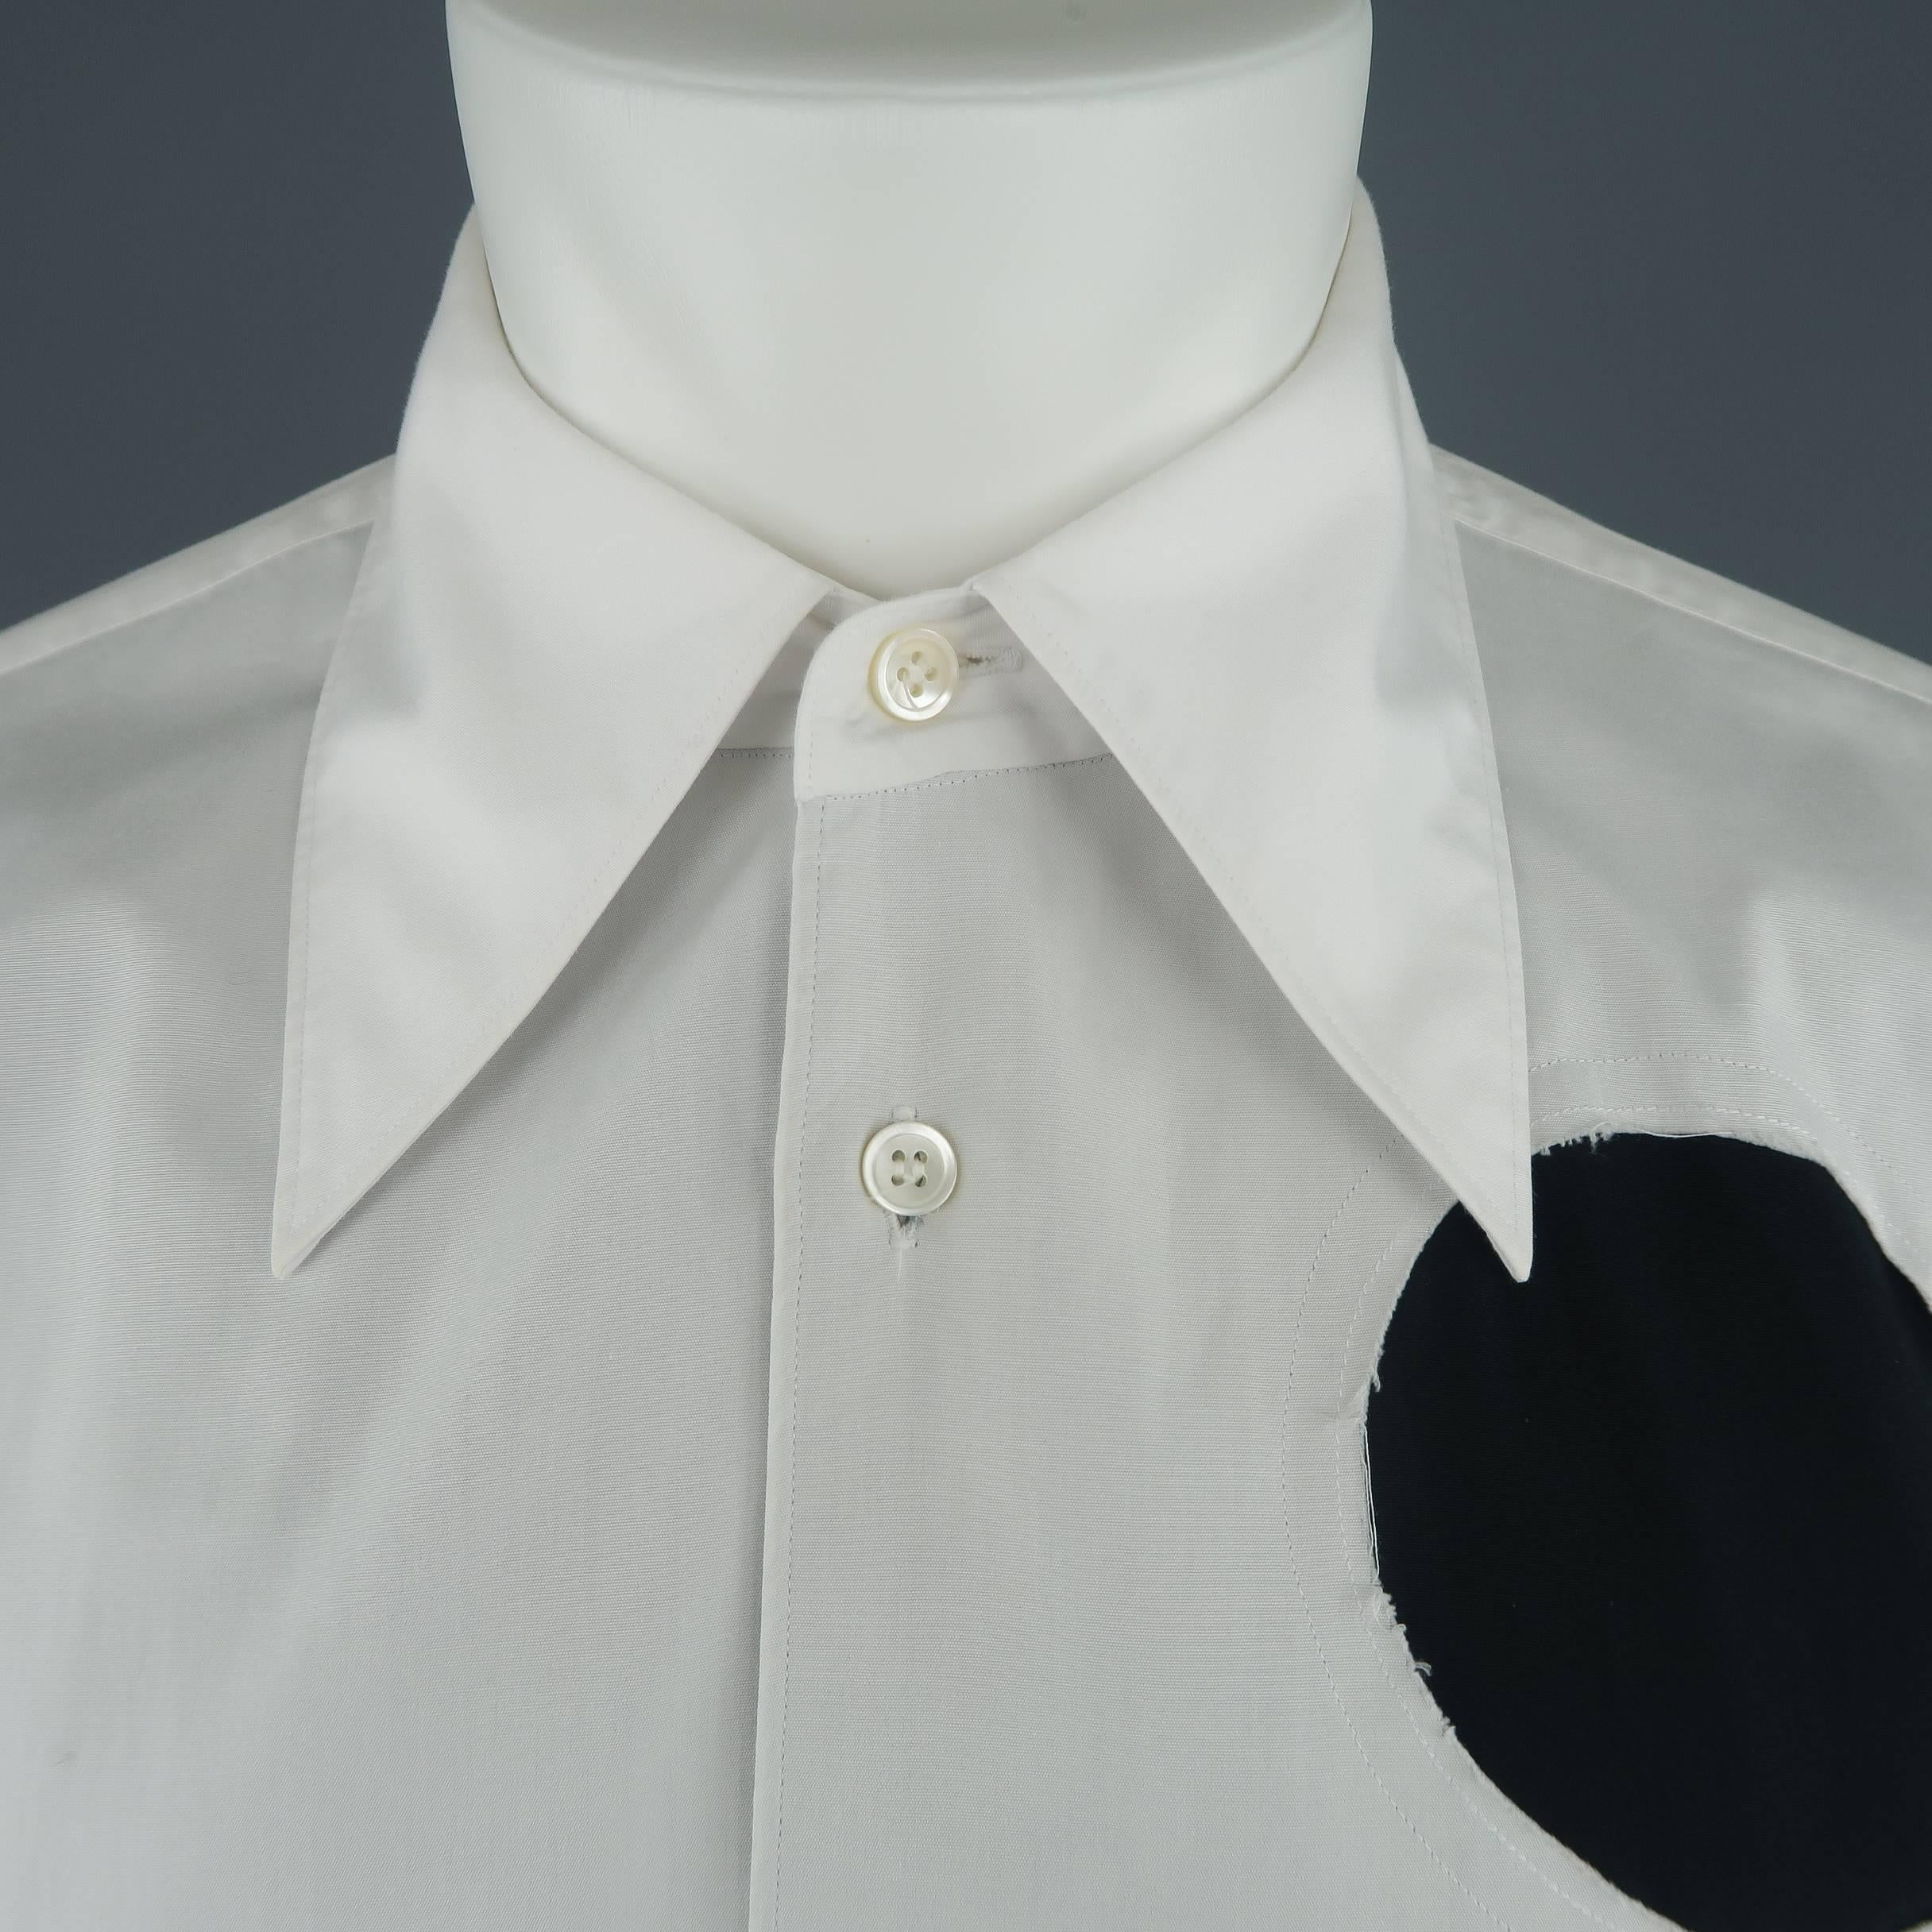 COMME des GARCONS HOMME PLUS shirt comes in white cotton with an oversized, pointed collar and three frayed circle cutouts patched with black fabric. Made in Japan.
 
Excellent Pre-Owned Condition.
Marked: M
 
Measurements:
 
Shoulder: 18 in.
Chest: